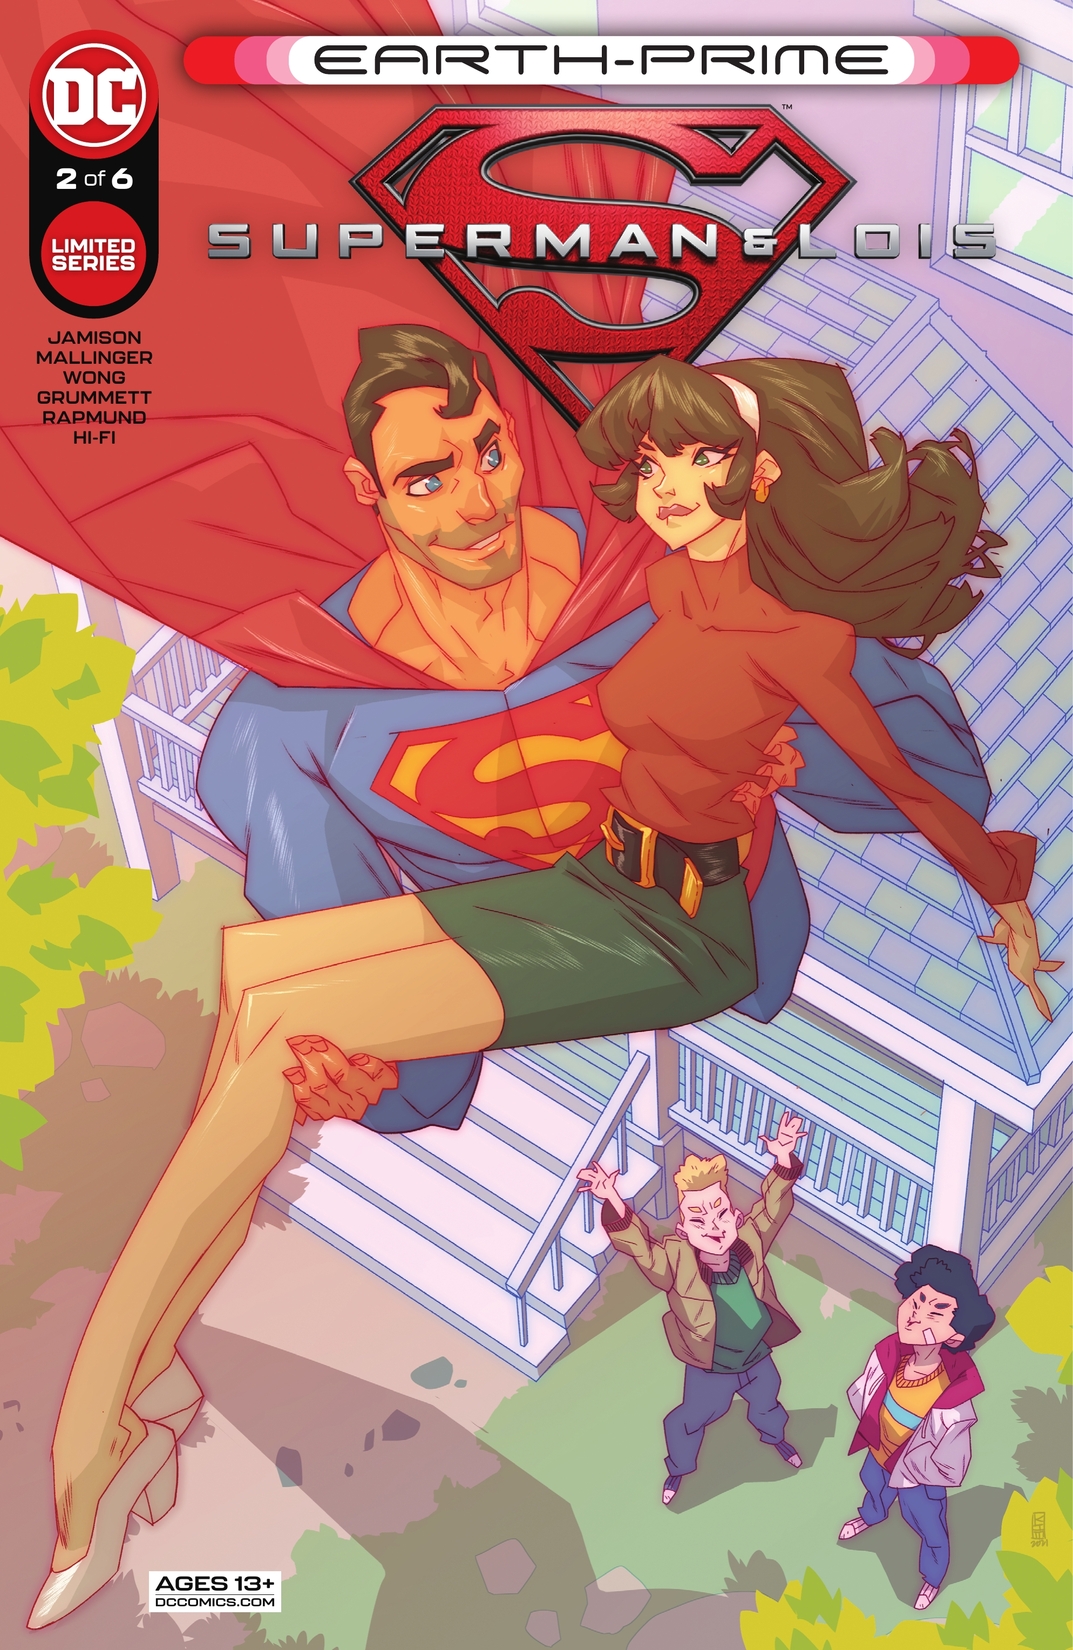 Earth-Prime: Superman & Lois #2 preview images